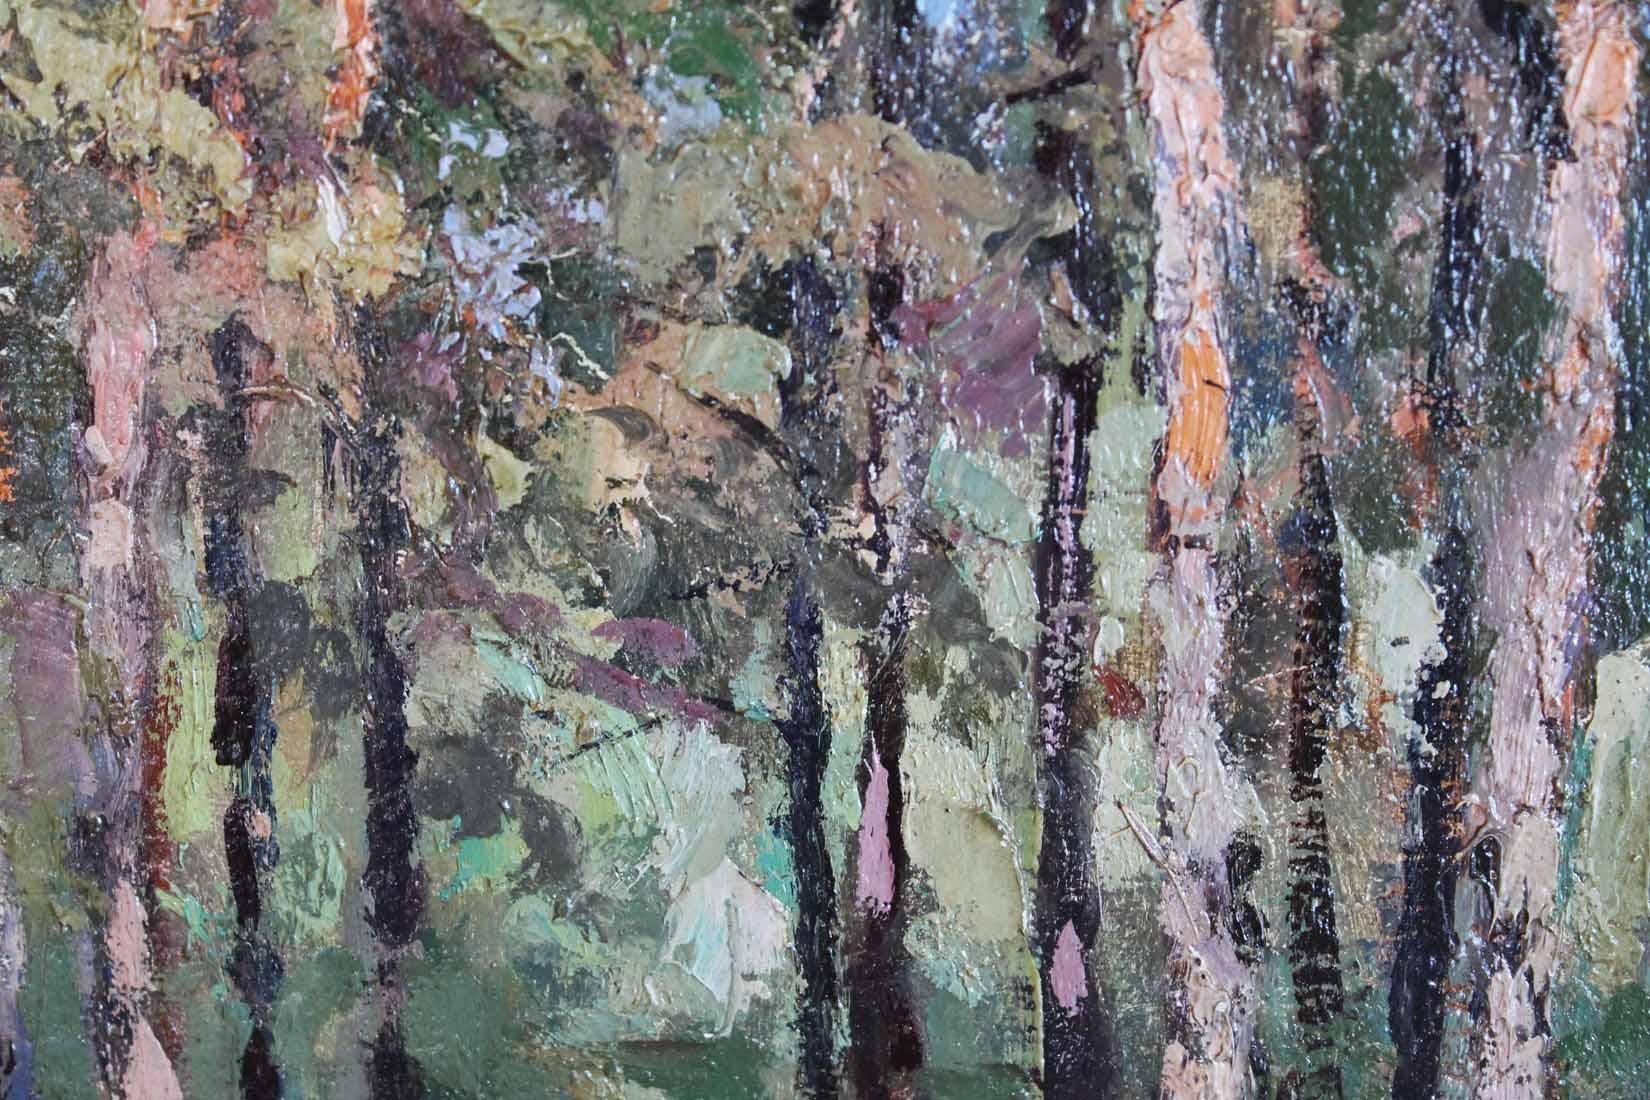 Edge of the Forest - Impressionist Painting by Vladimir Korobov